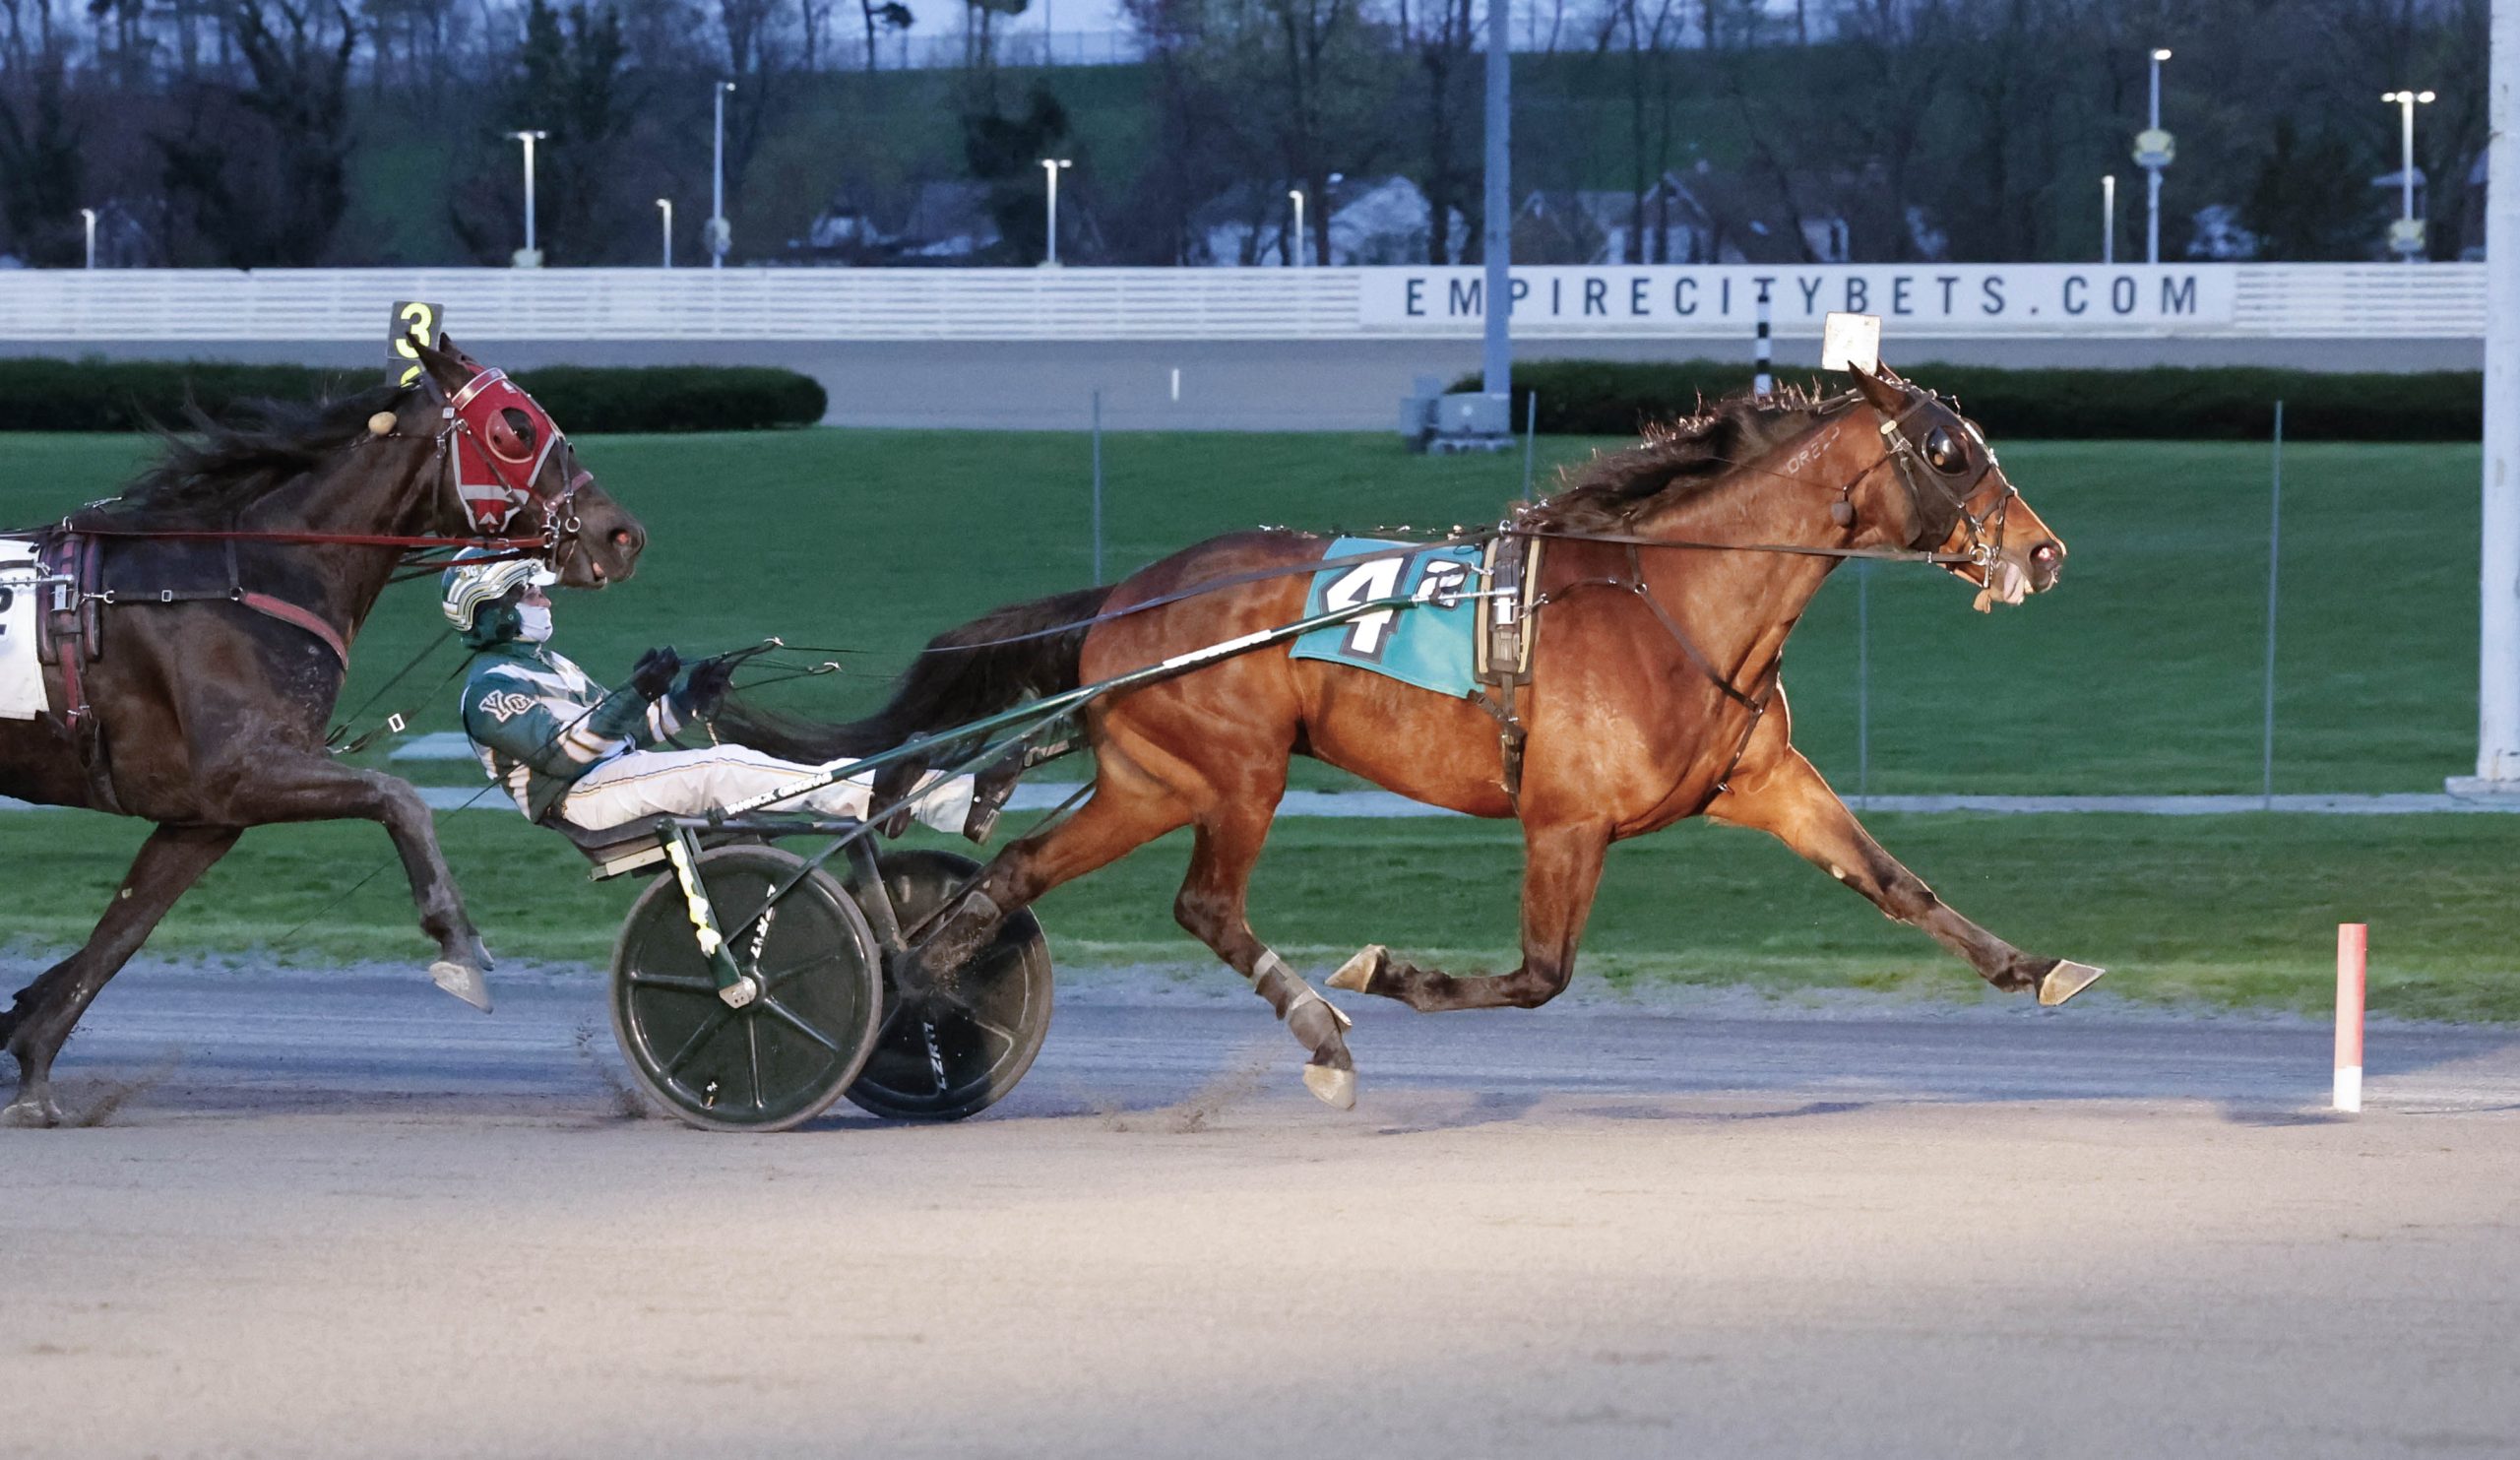 Trotters take center stage at Yonkers